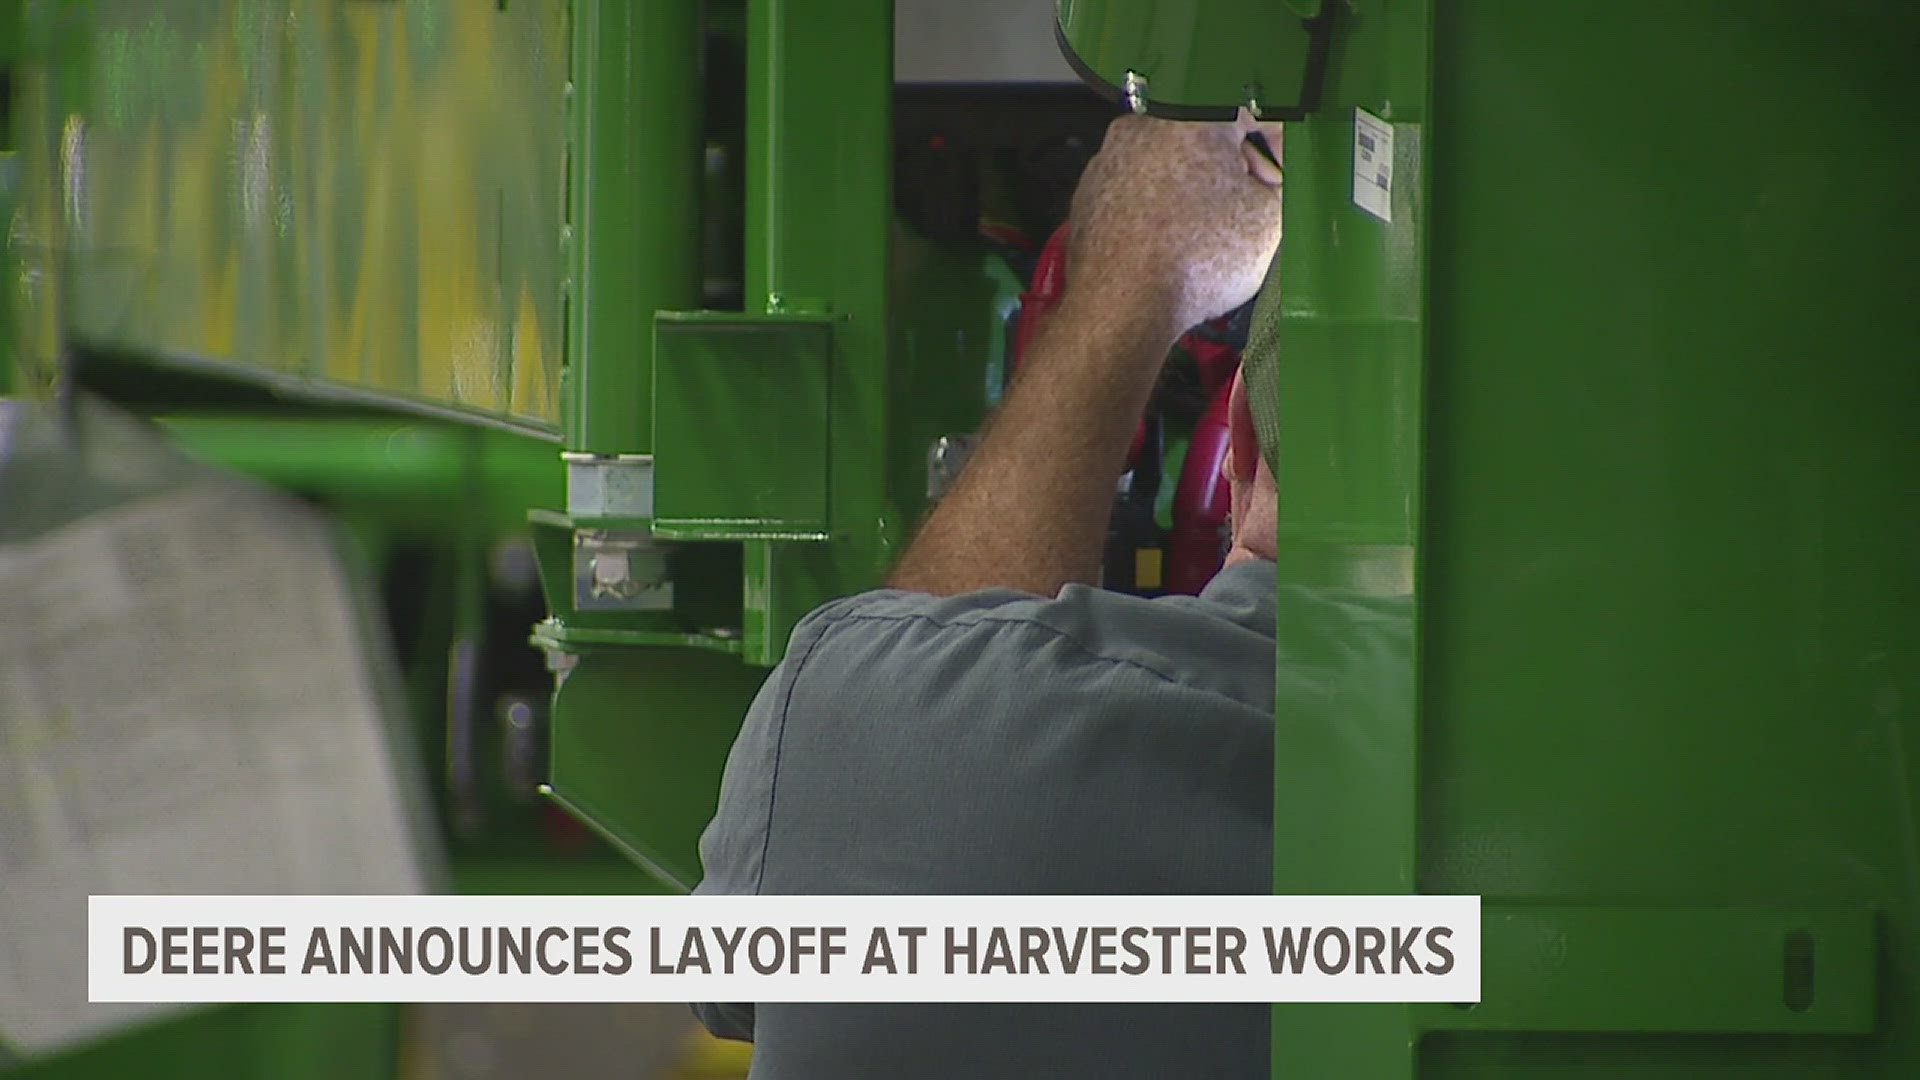 The layoffs go into effect on Oct. 16.